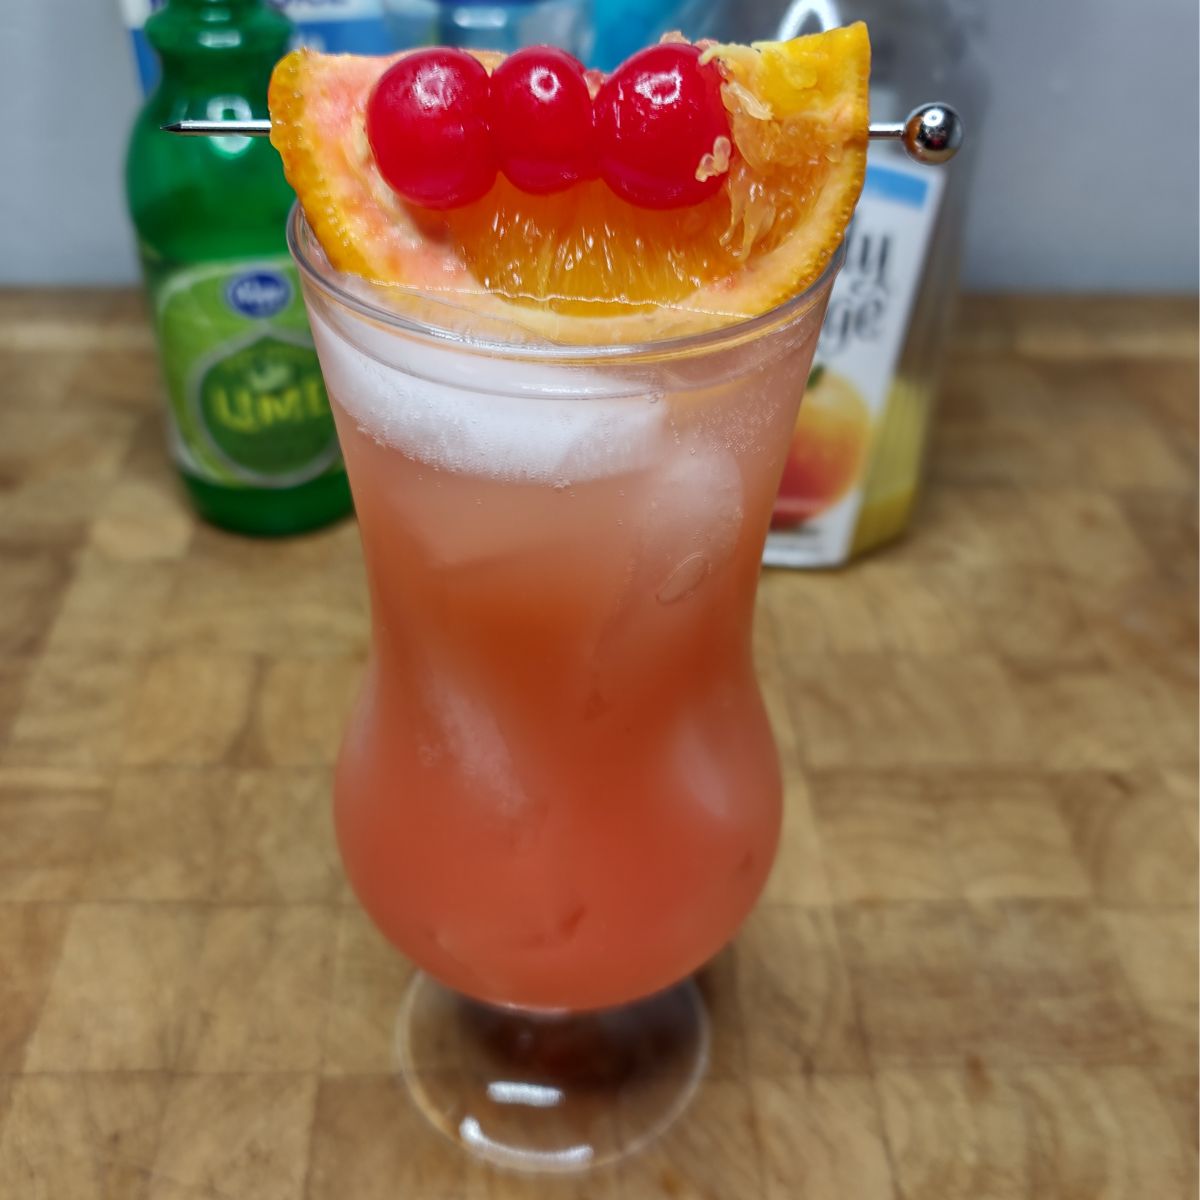 Mai tai mocktail with cherries and orange on top of the glass and ingredients in the background.